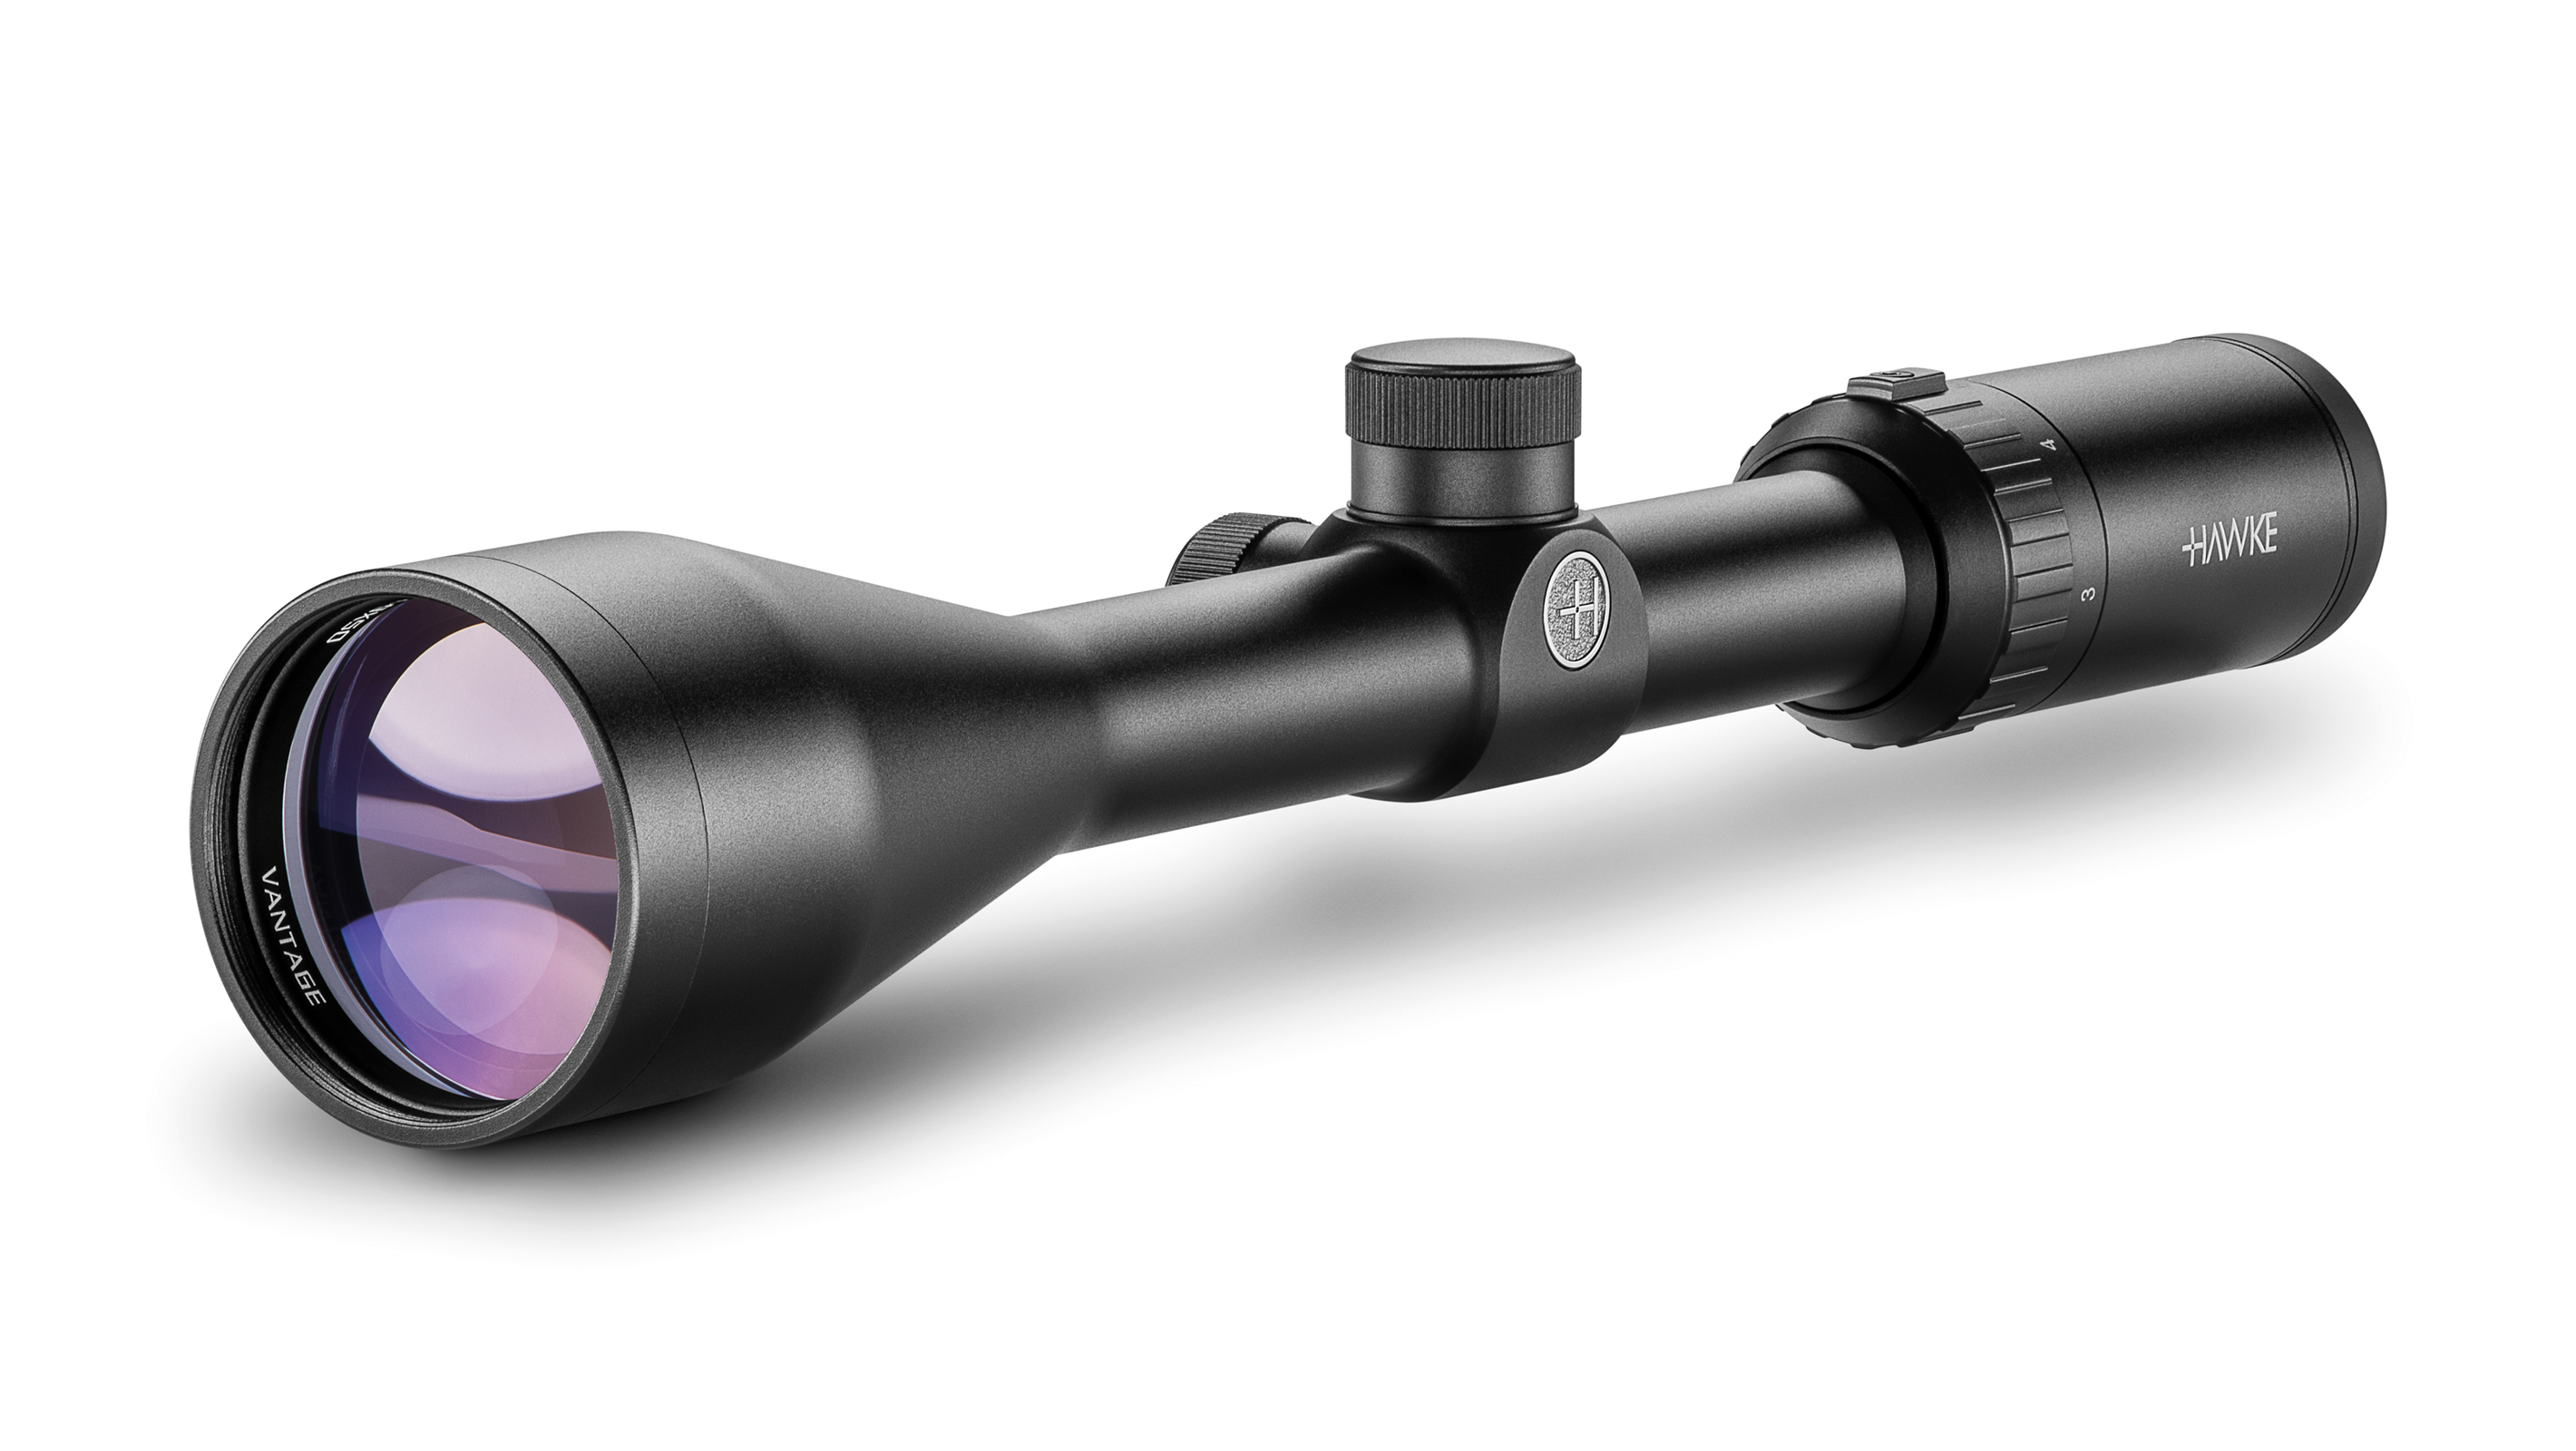 Objective End View Of The Hawke Vantage 3-9x50 Mil Dot Rifle Scope